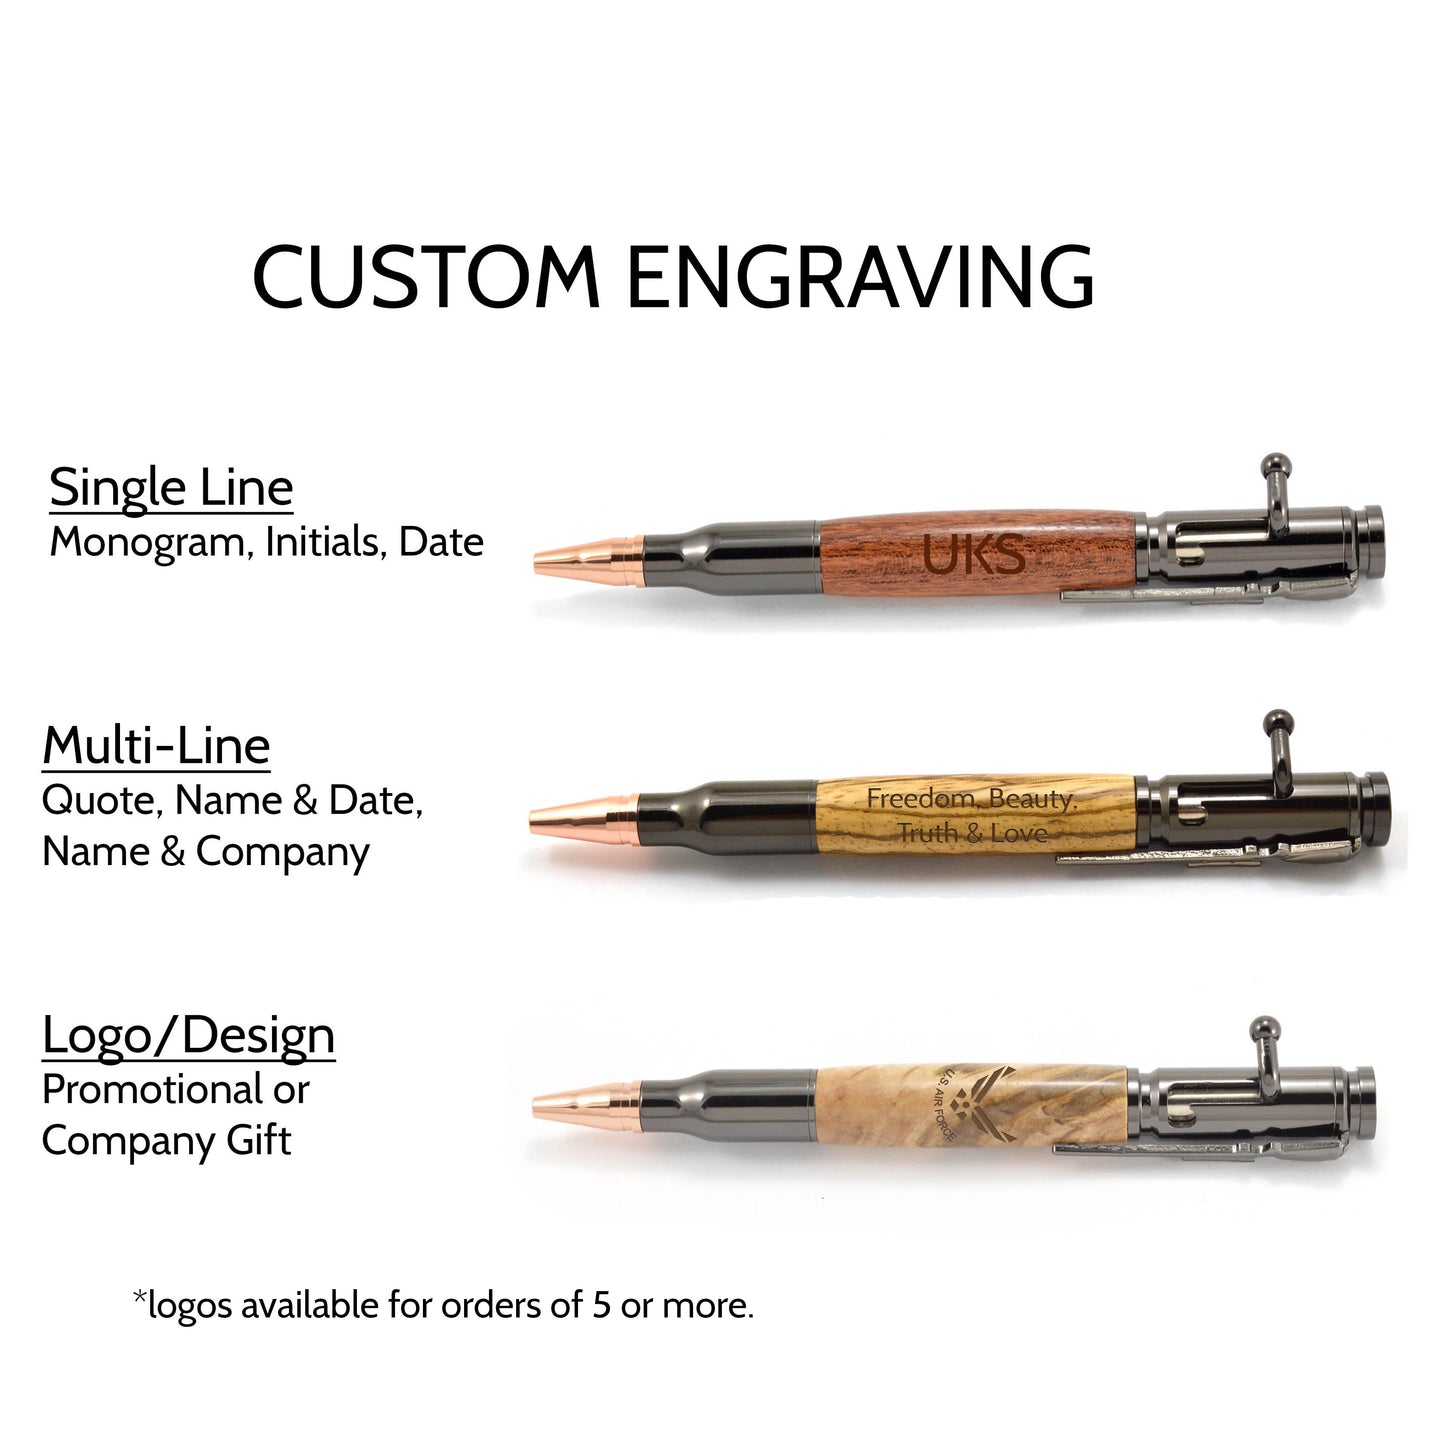 Image of 3 Bolt Action Pens that show the different types of custom engravings we are able to do